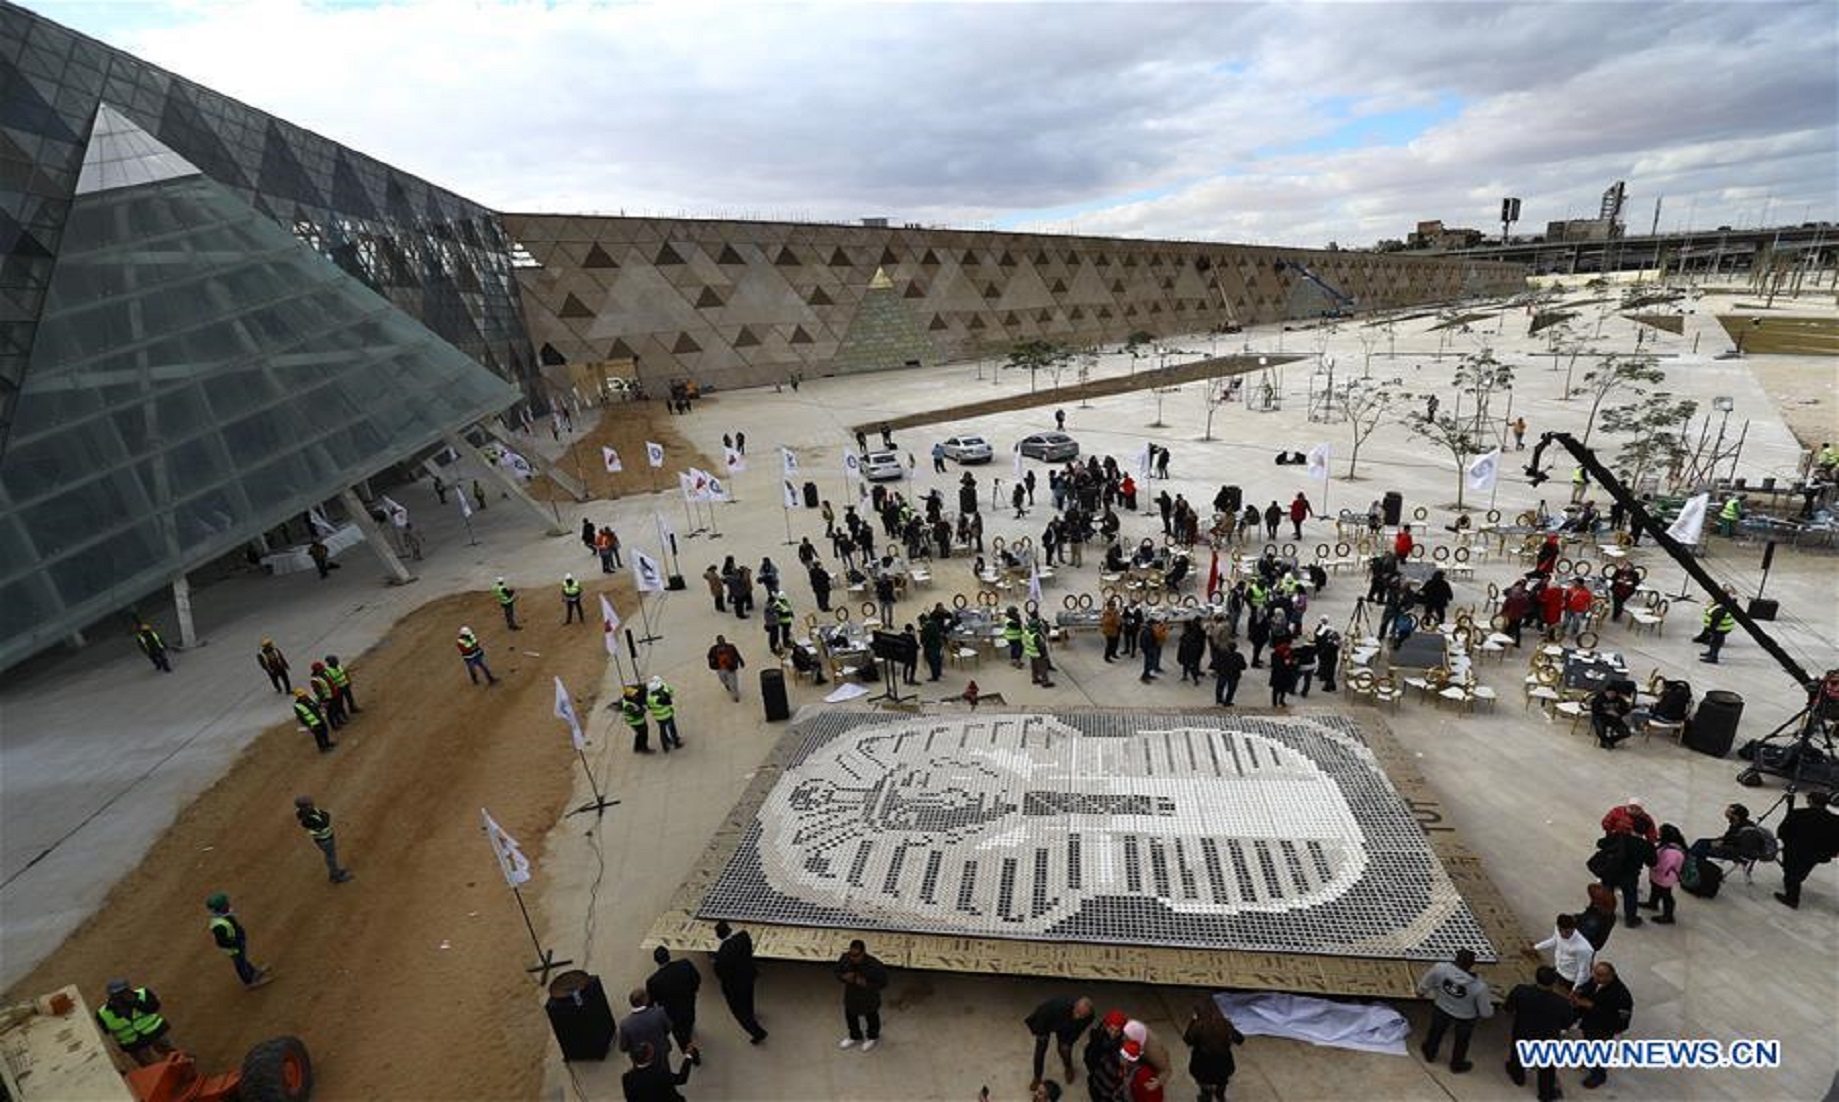 Egypt Sets New Guinness World Record For Largest Mosaic Of King Tut’s Mask